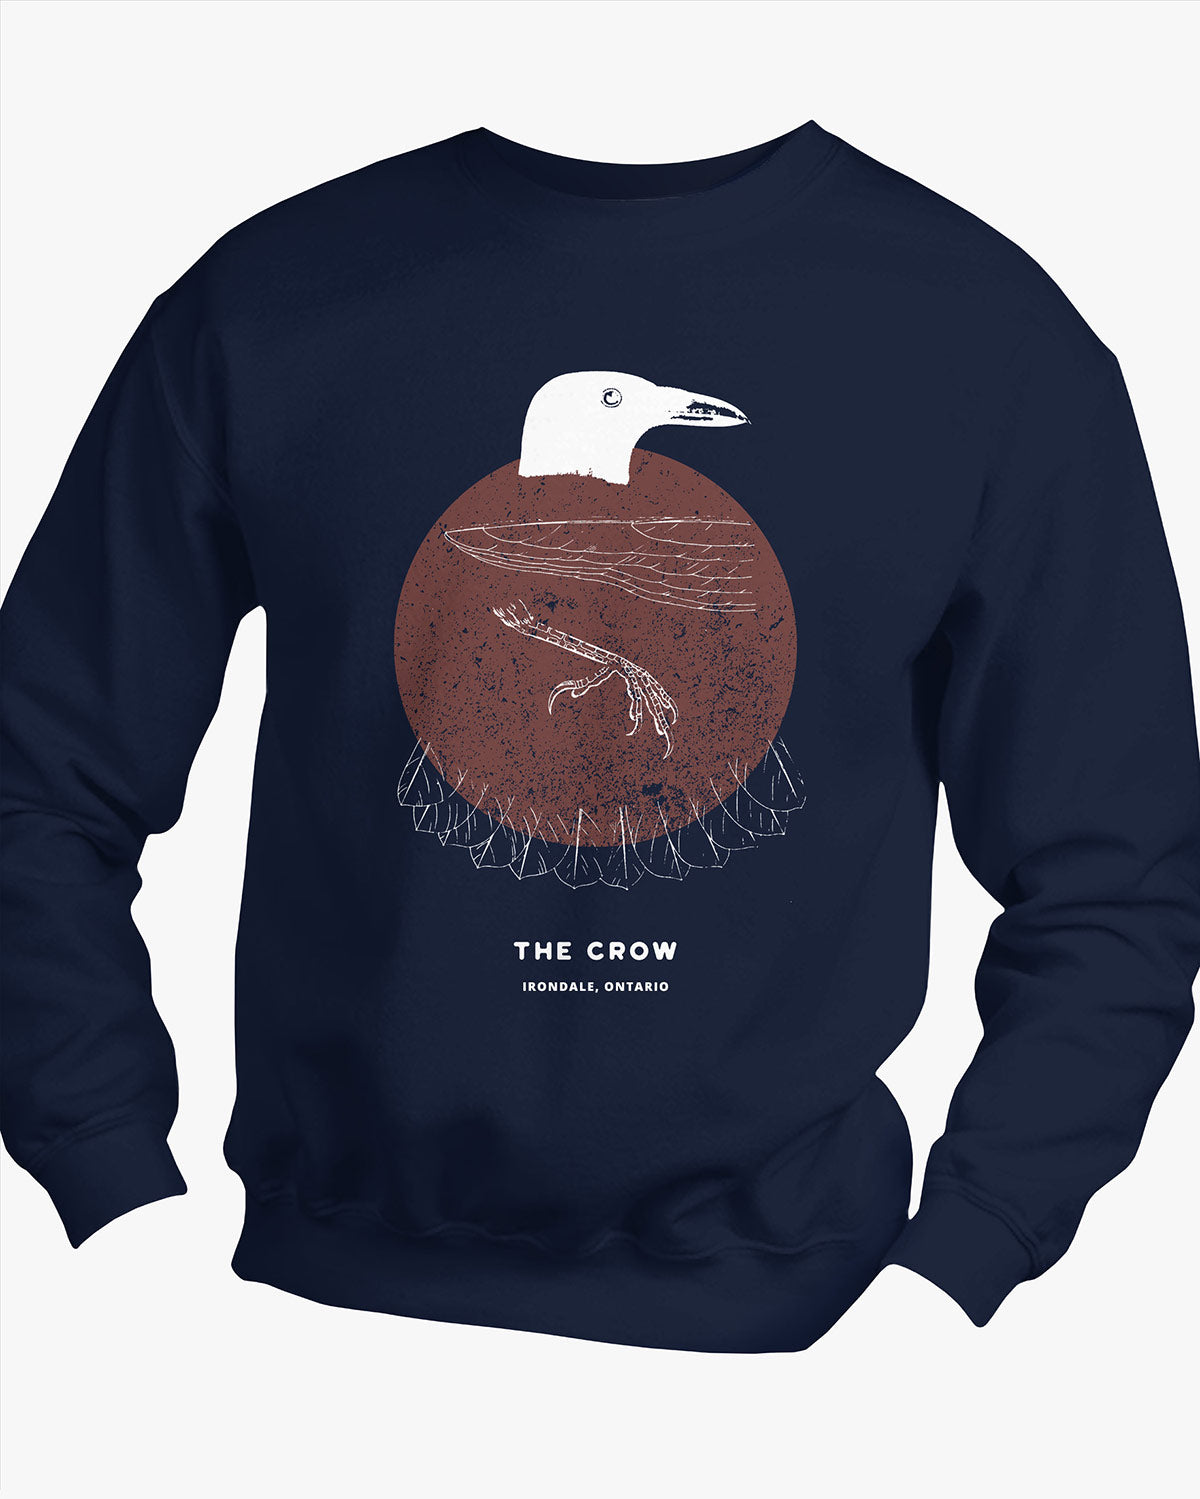 The Crow - Irondale - Sweater